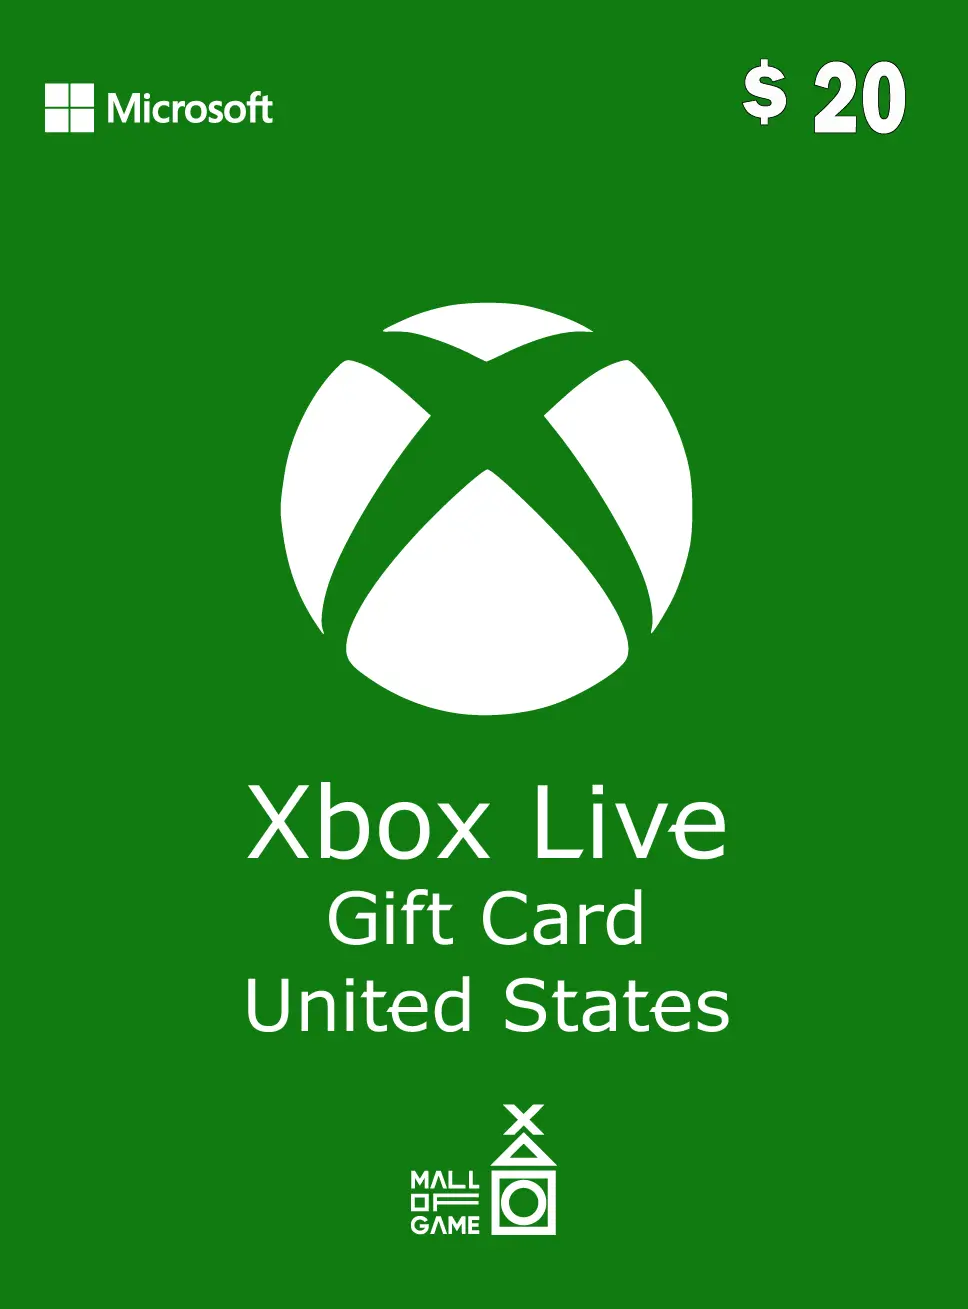 Xbox Live Gift Card - US$ 20